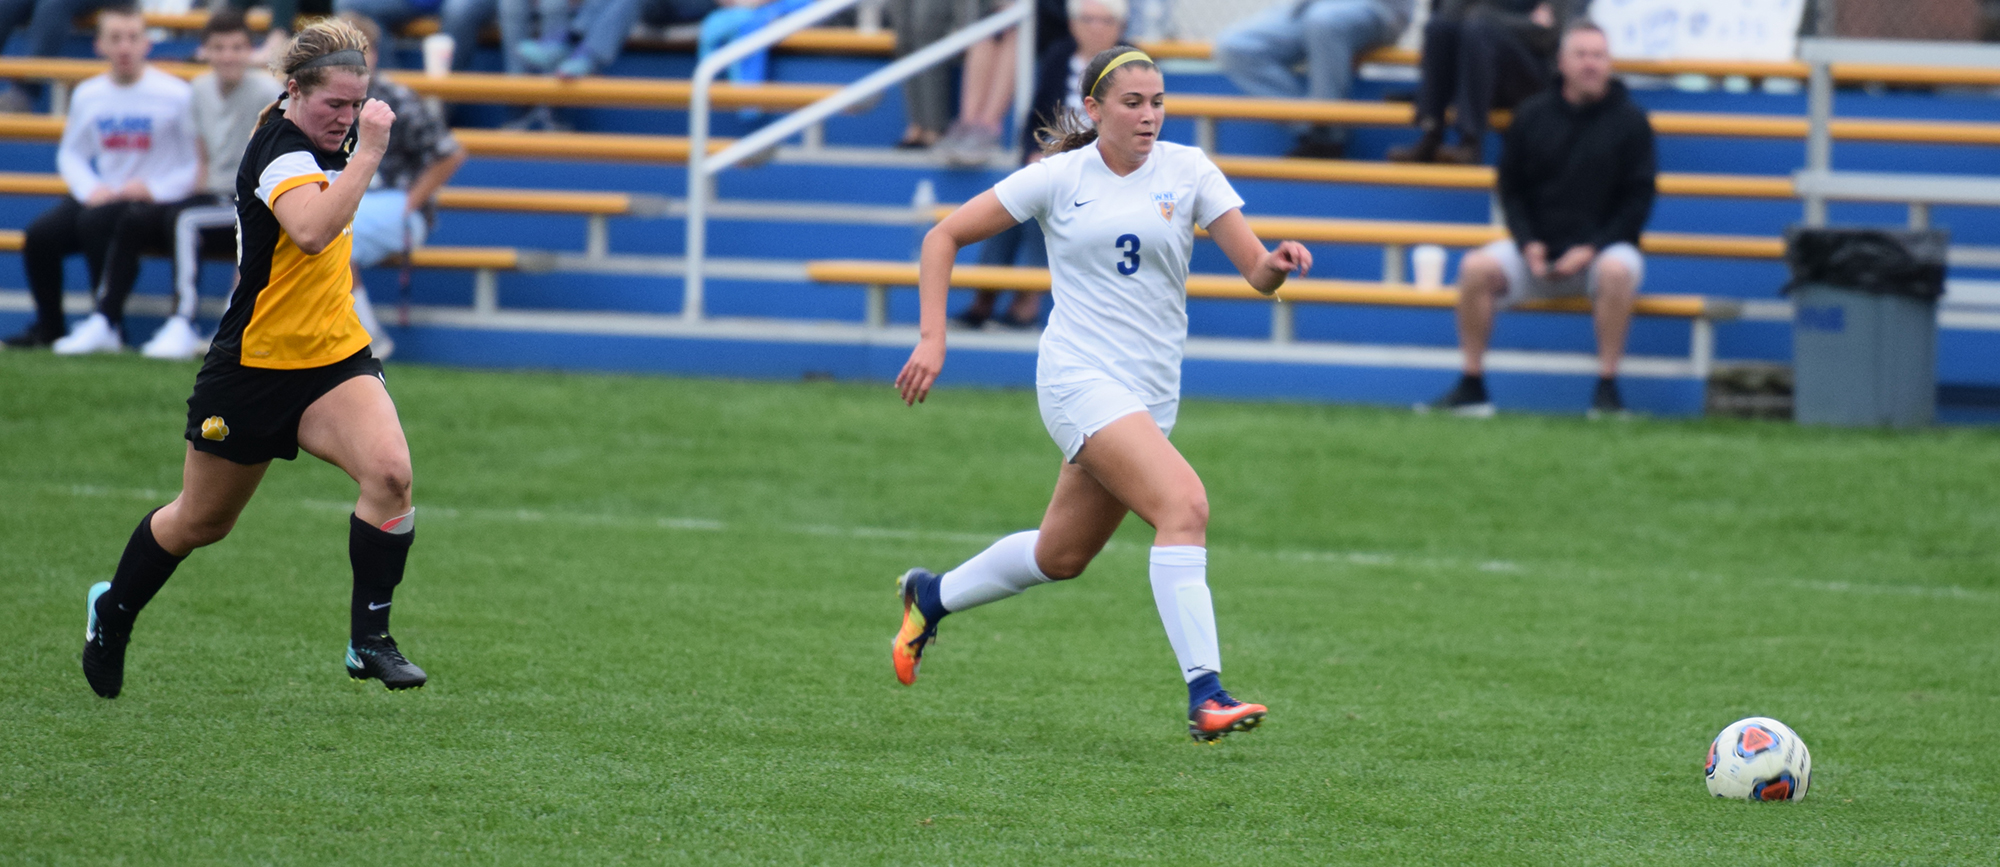 Freshman Morgan Smith scored her team-leading third goal of the season in Wednesday's 2-0 victory over Wentworth.